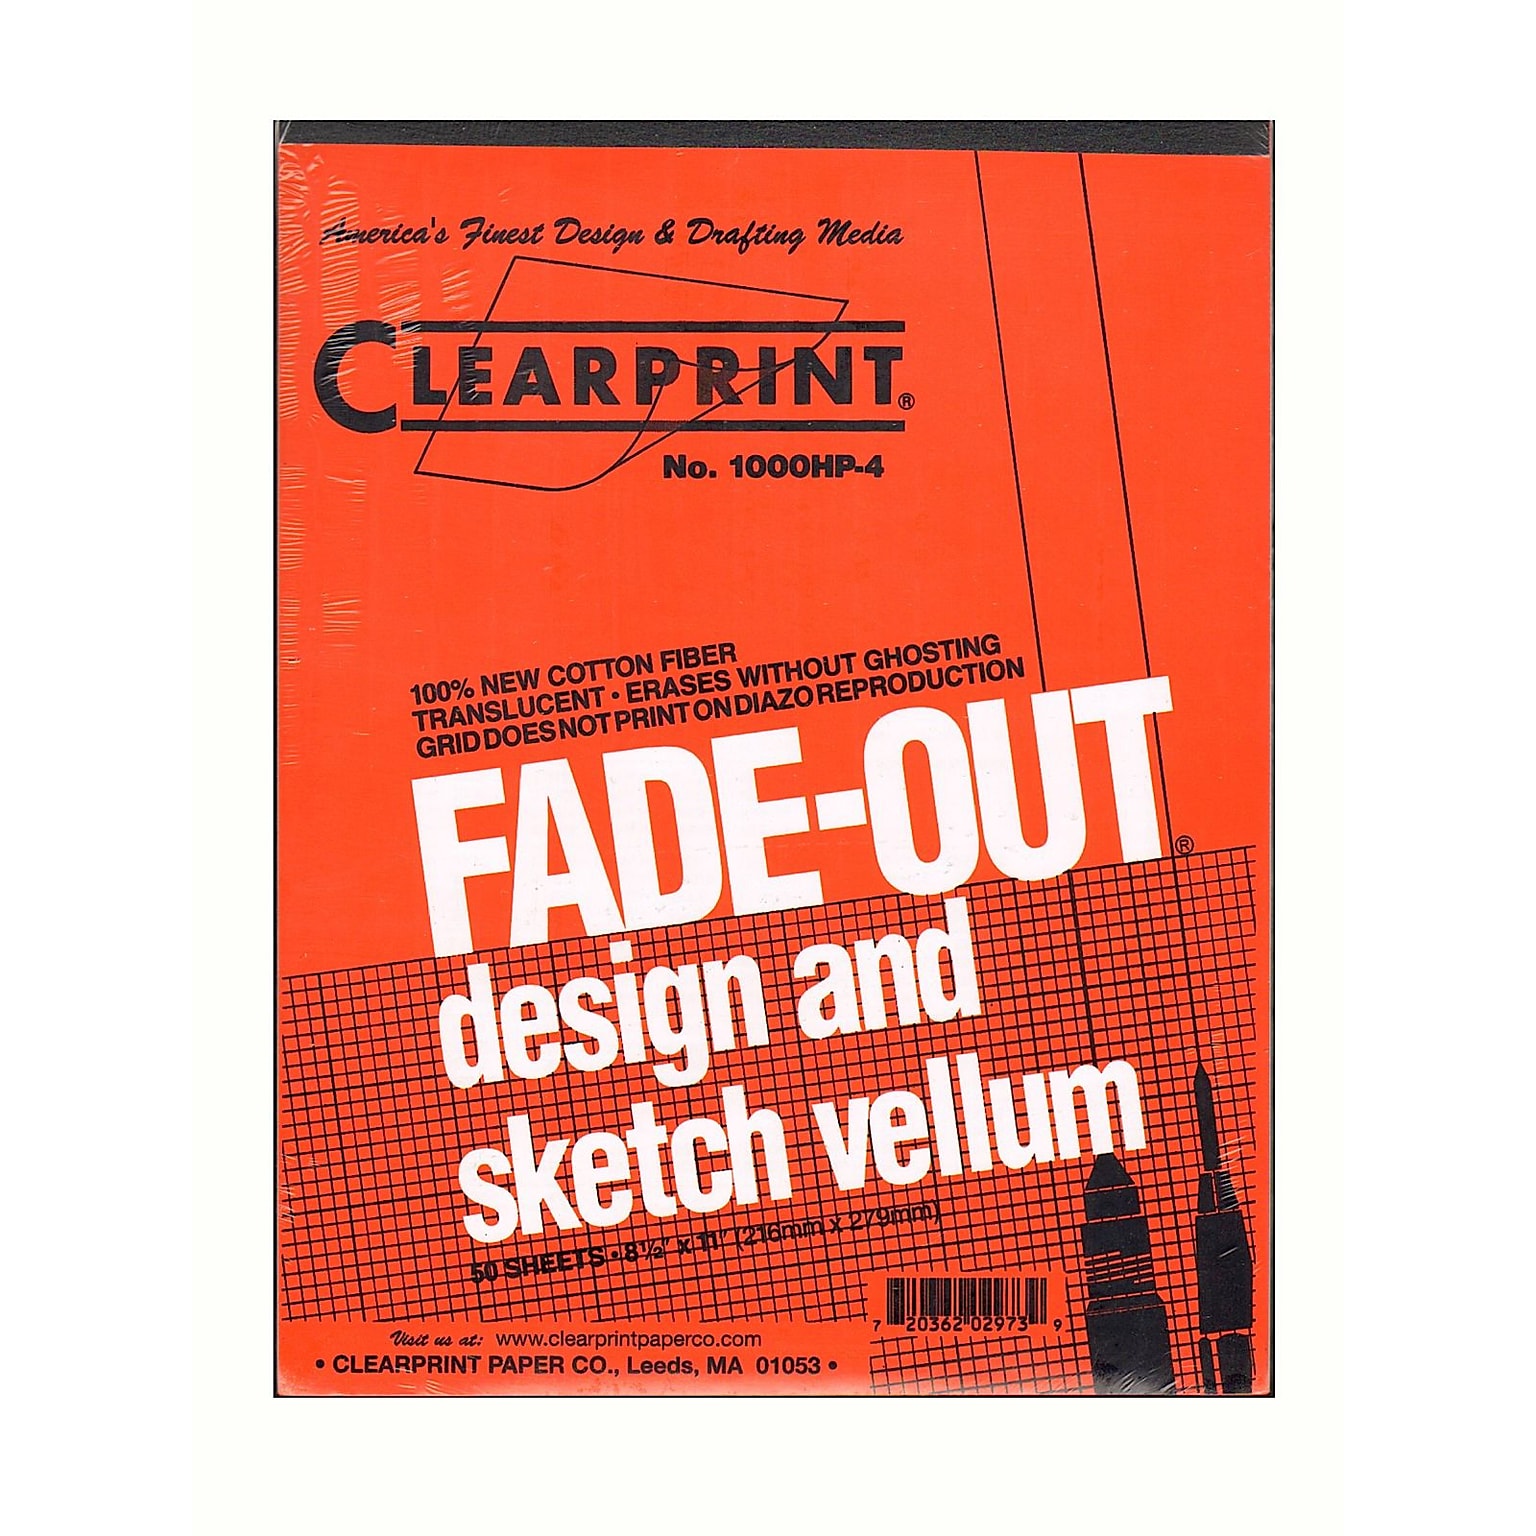 Clearprint Fade-Out Design And Sketch Vellum - Grid Pad 4 X 4 8 1/2 In. X 11 In. Pad Of 50 (10004410)